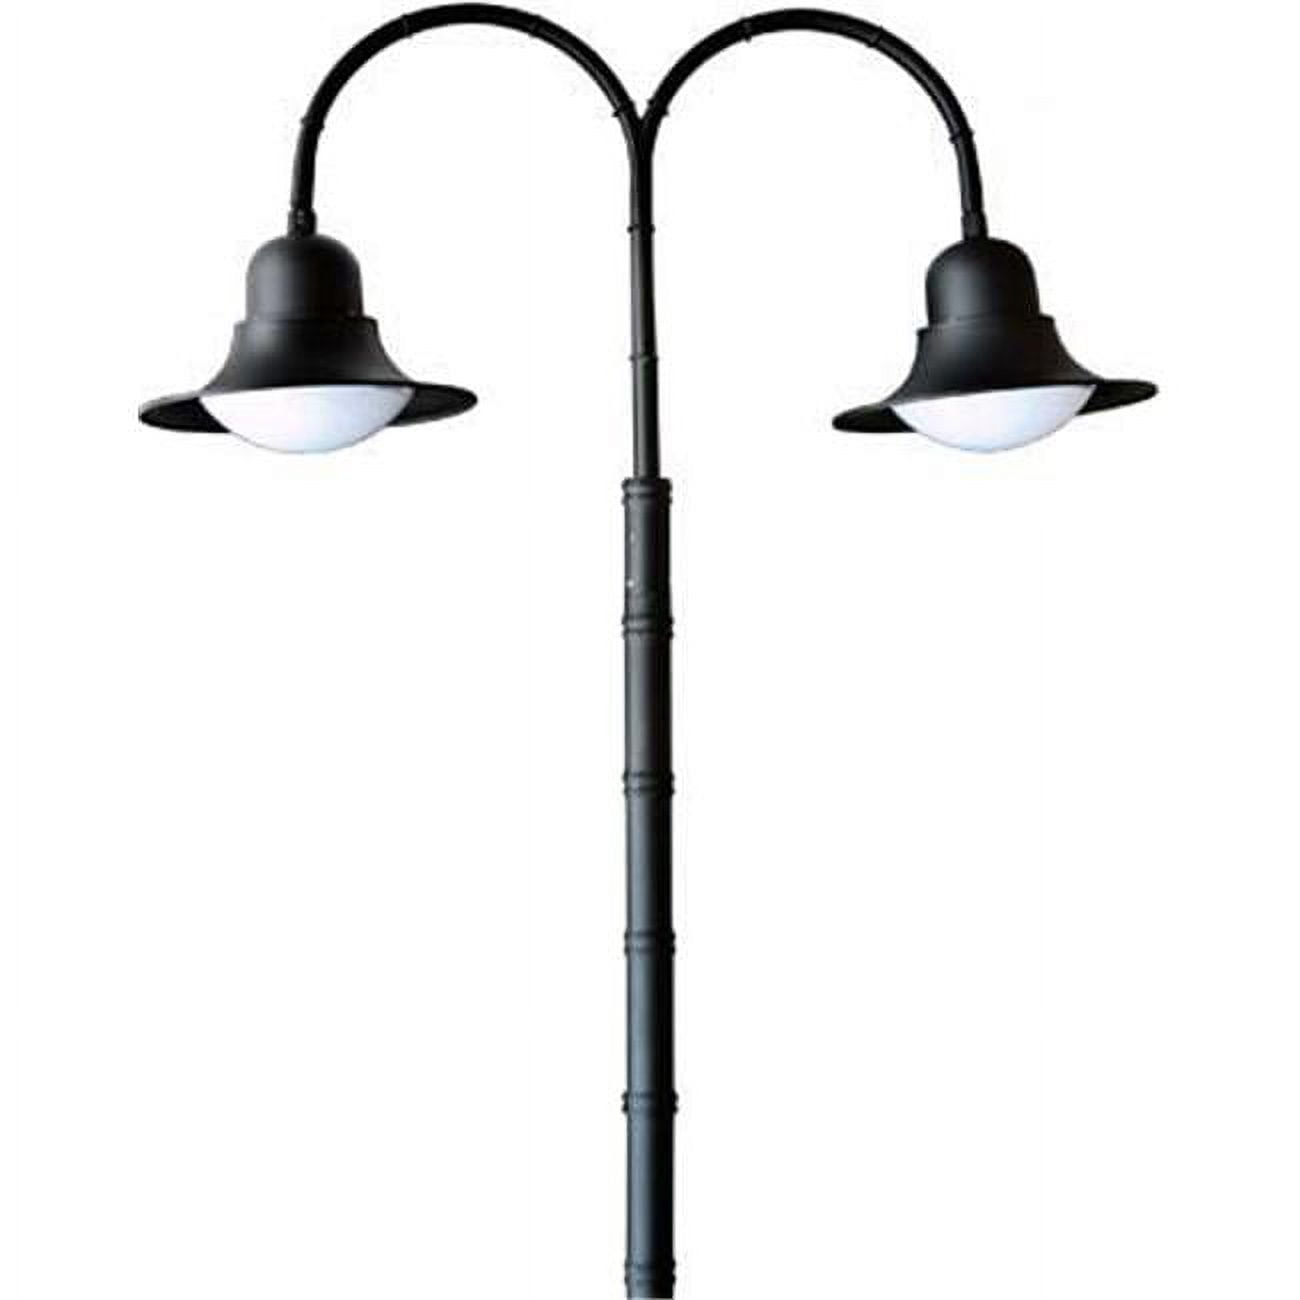 Picture of Dabmar Lighting GM624-VG-MT 70W Powder Coated Cast Aluminum Post Top Light Fixture with 2x High Pressure Sodium Lamp, Verde Green